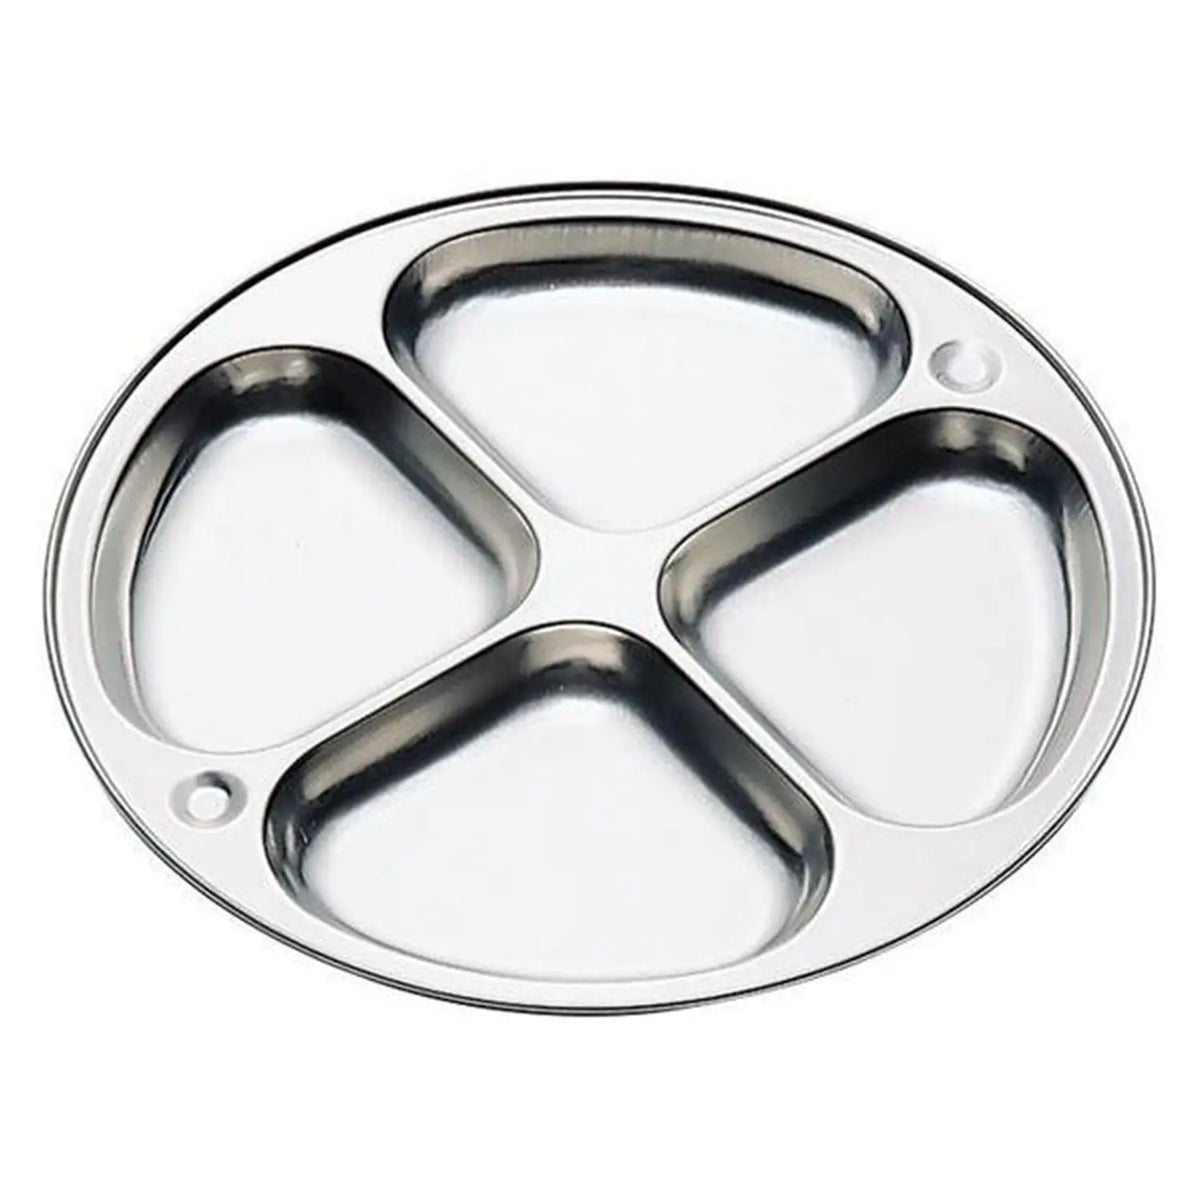 KOINU Stainless Steel 4 Compartments Lunch Plate